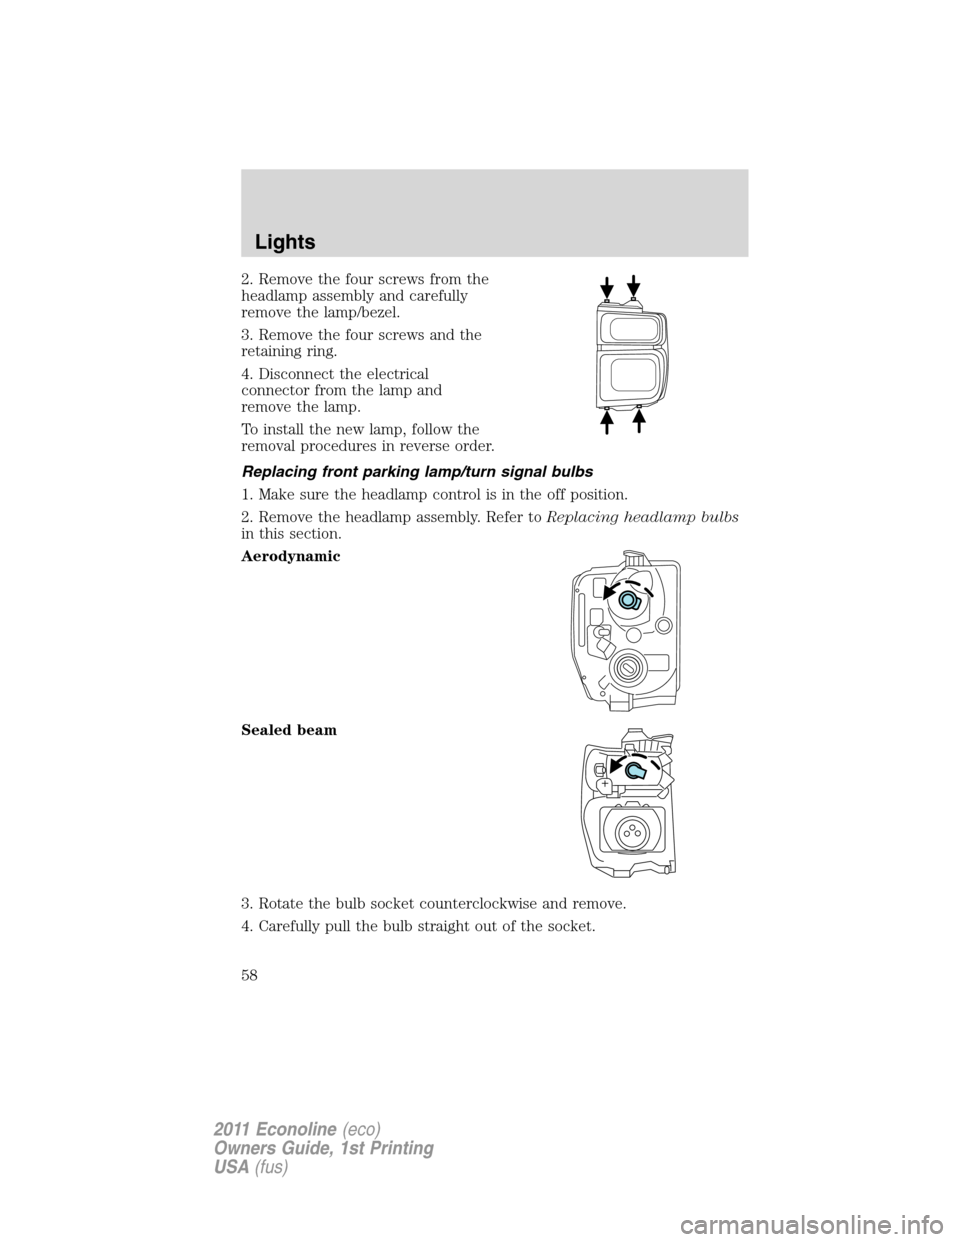 FORD E SERIES 2011 4.G Owners Manual 2. Remove the four screws from the
headlamp assembly and carefully
remove the lamp/bezel.
3. Remove the four screws and the
retaining ring.
4. Disconnect the electrical
connector from the lamp and
rem